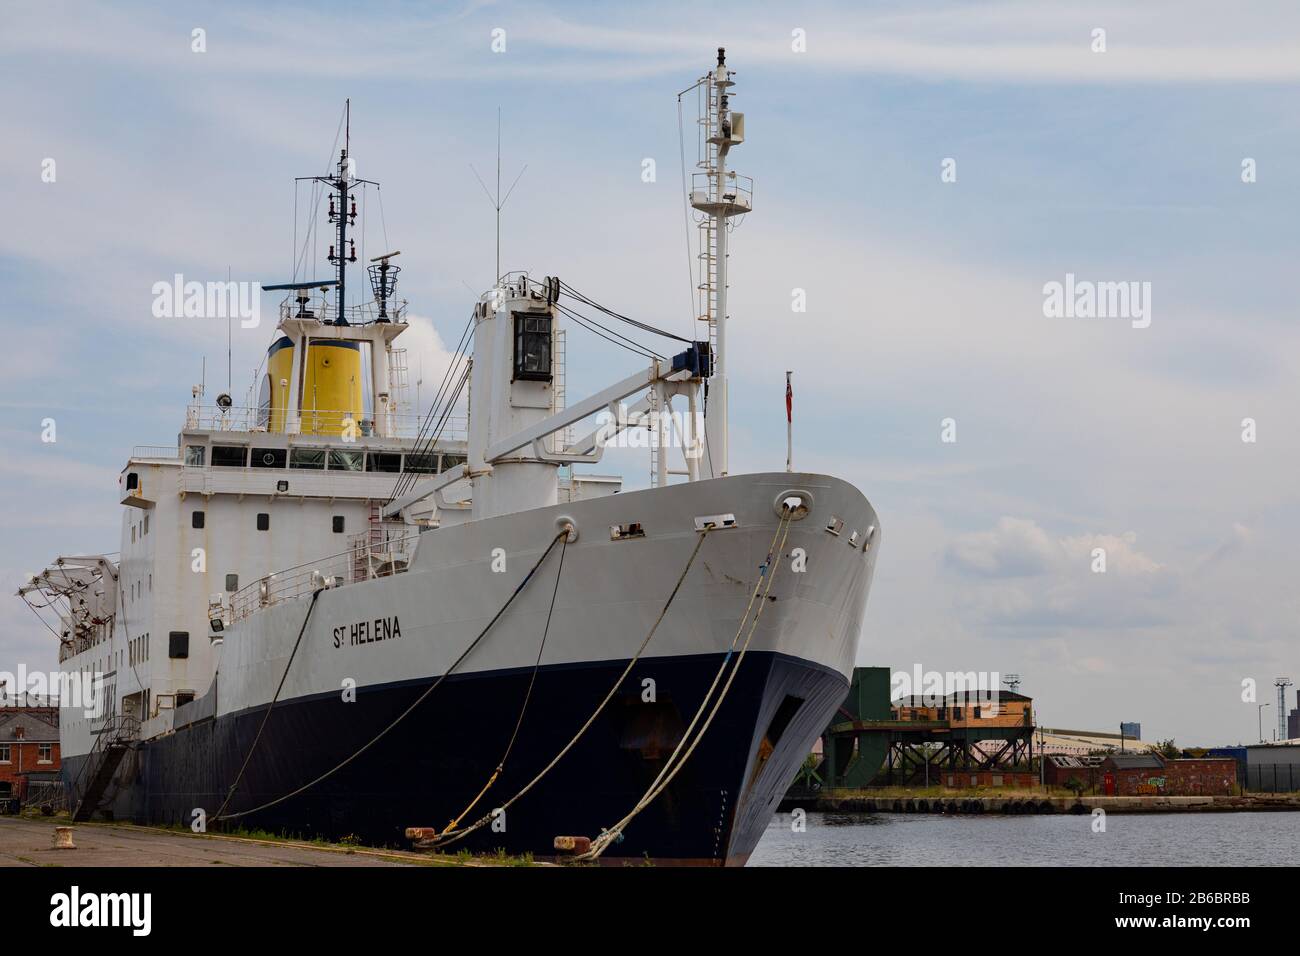 View of the St Helena from looking towards the bow in Wallasey Wirral August 2019 Stock Photo